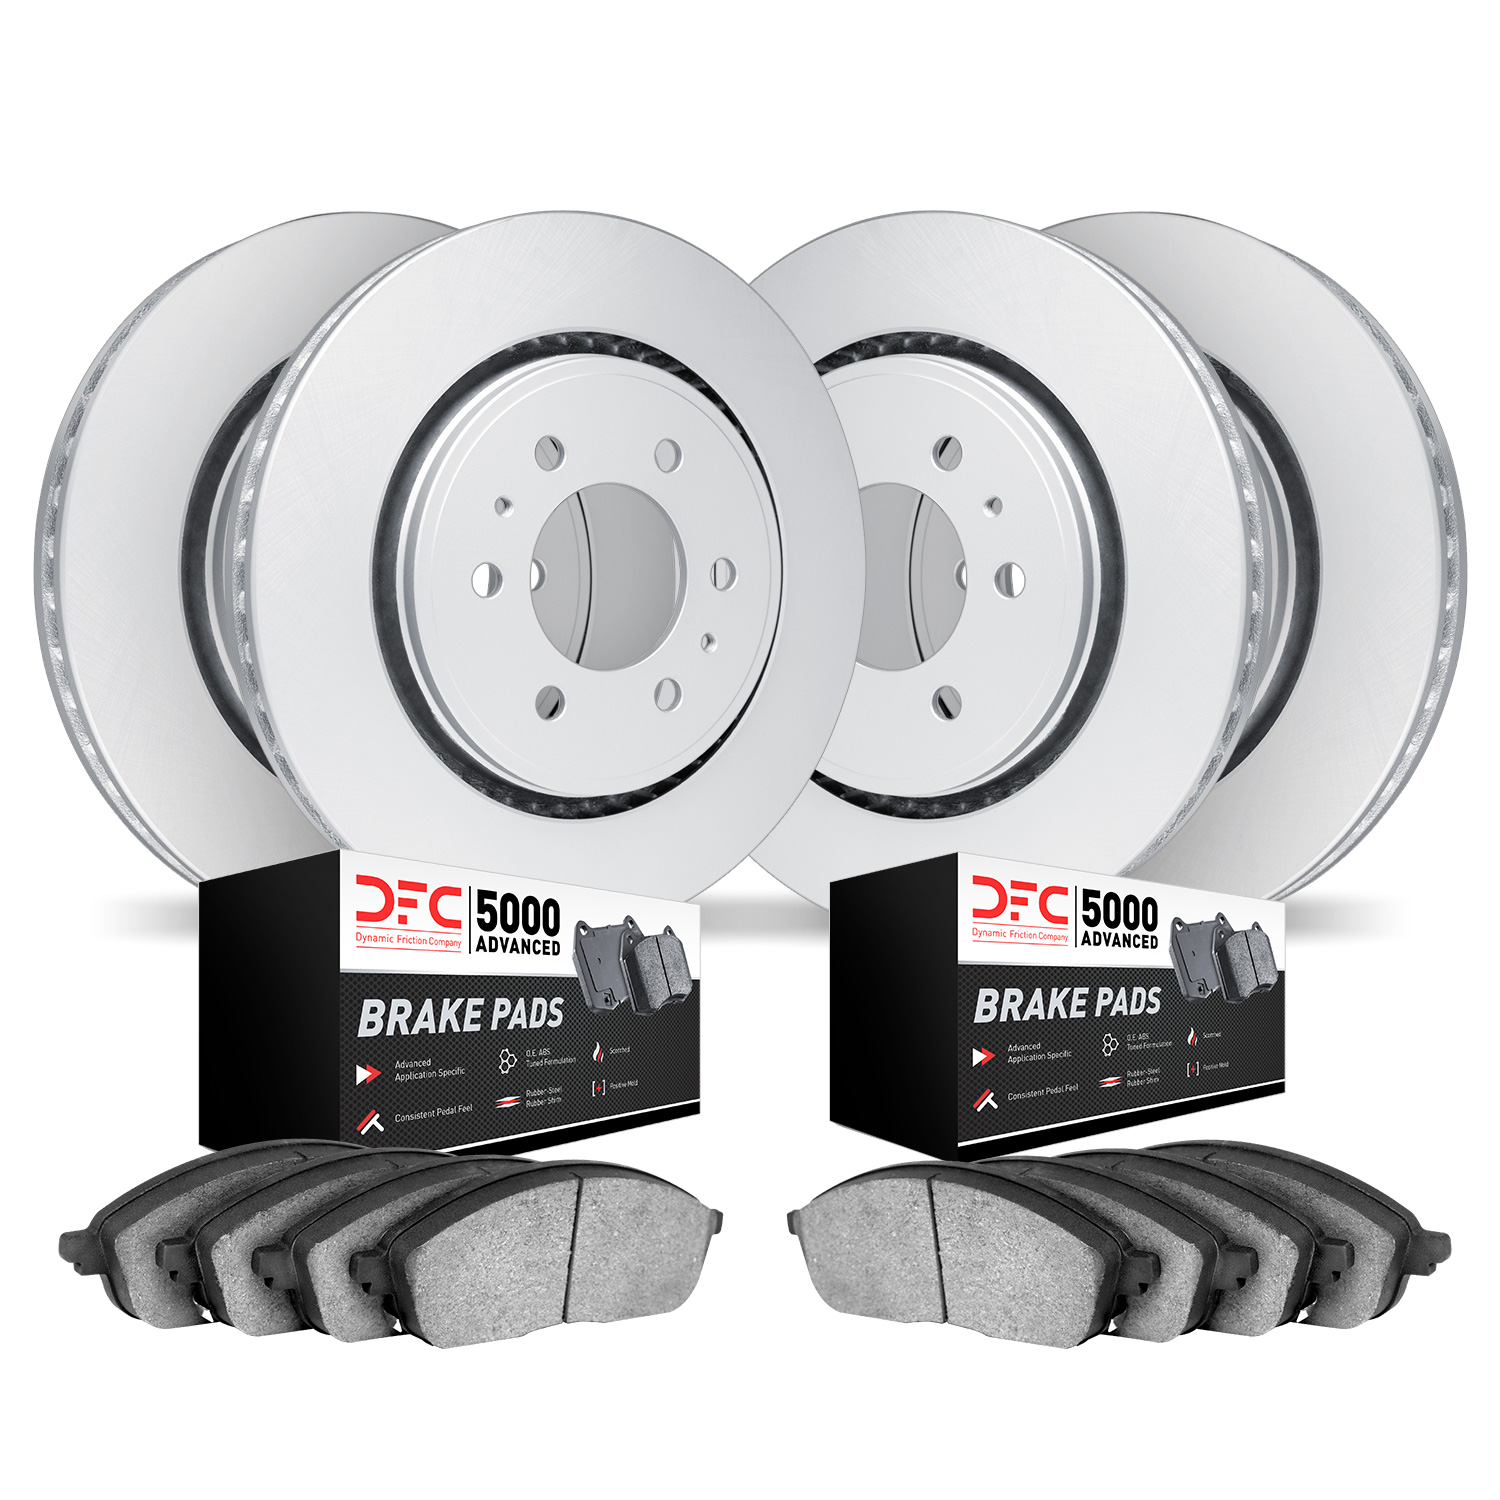 4504-48033 Geospec Brake Rotors w/5000 Advanced Brake Pads Kit, 2014-2020 GM, Position: Front and Rear